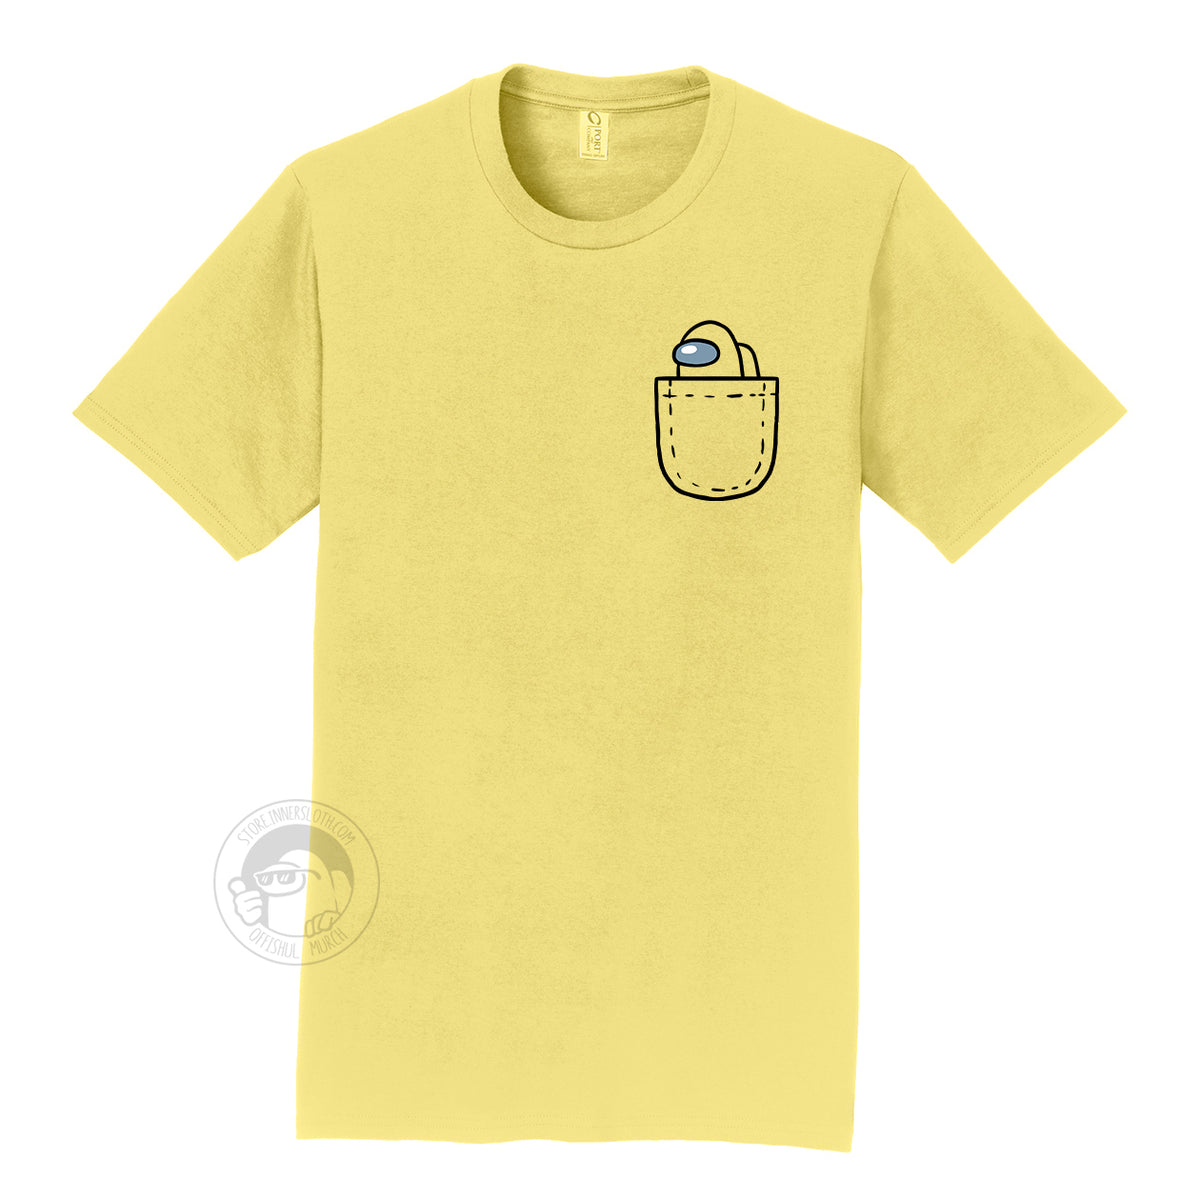 A product photograph of the Among Us: Mini Crewmate Pocket Tee in yellow. The shirt art depicts a fake pocket and a small crewmate peeking out of it. The crewmate is the same color as the rest of the shirt.